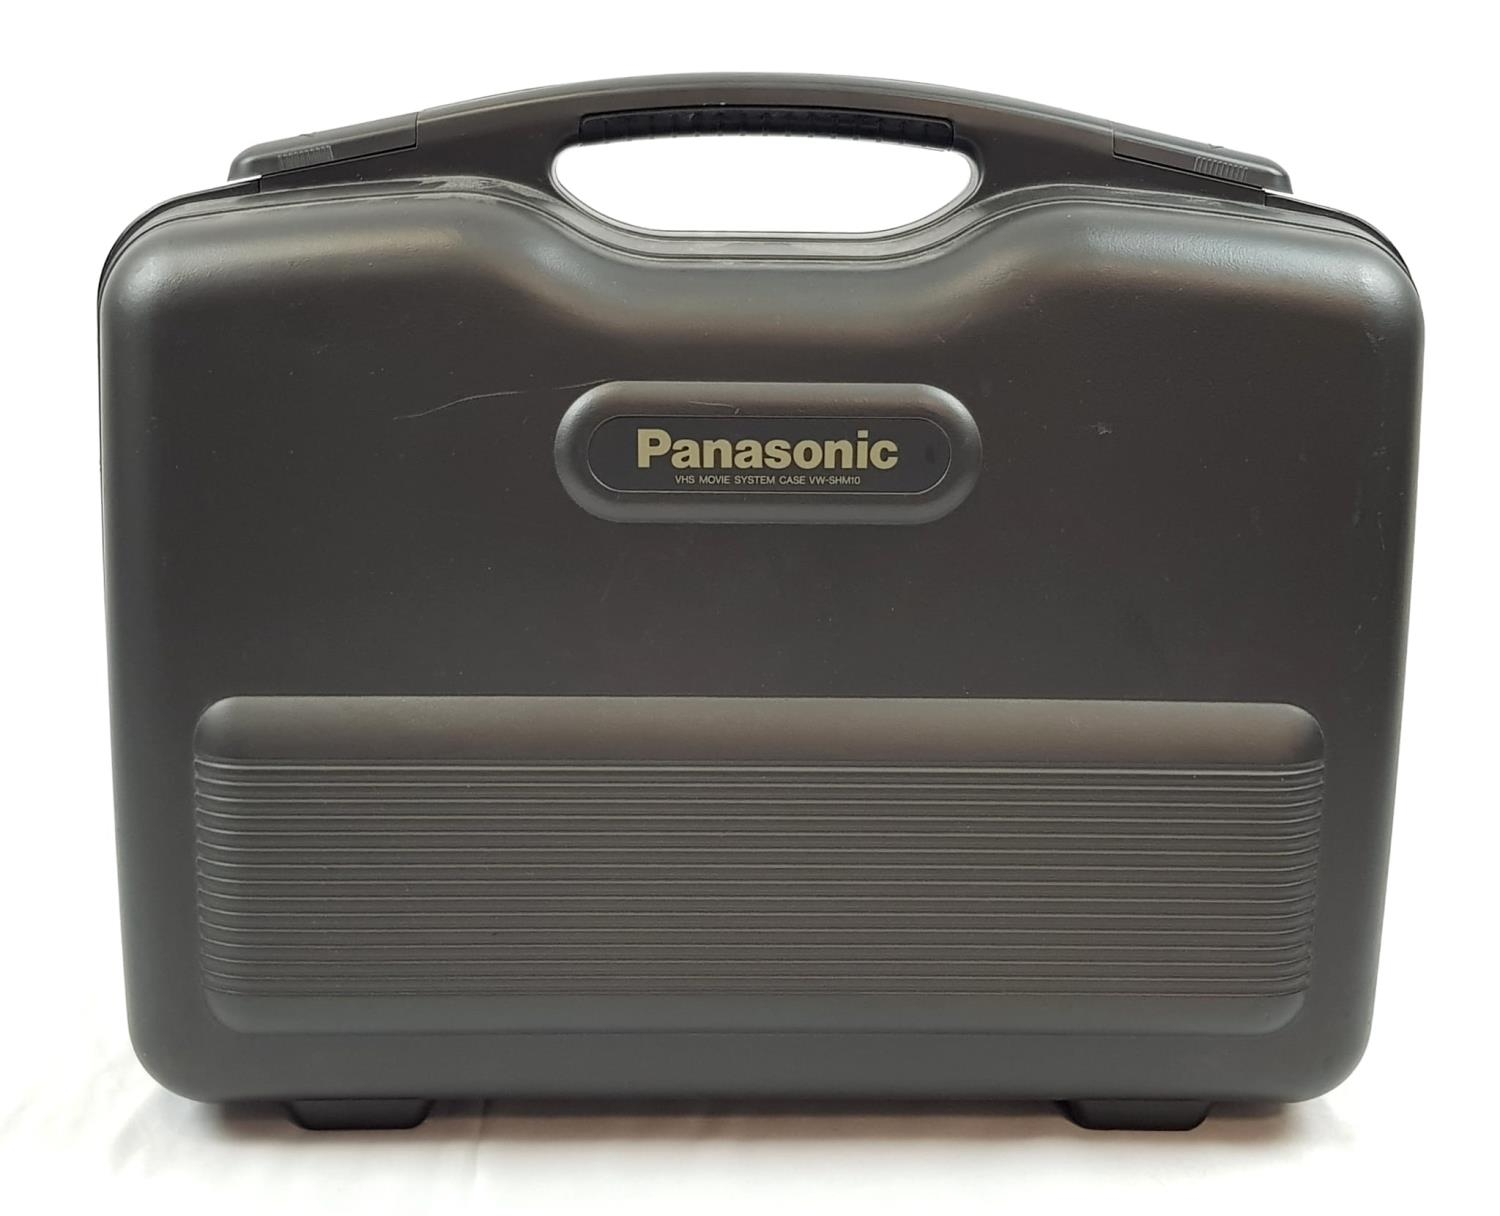 A Panasonic NV-M10 Camcorder. Comes with battery pack, cables and instructions - in original case. - Image 28 of 28